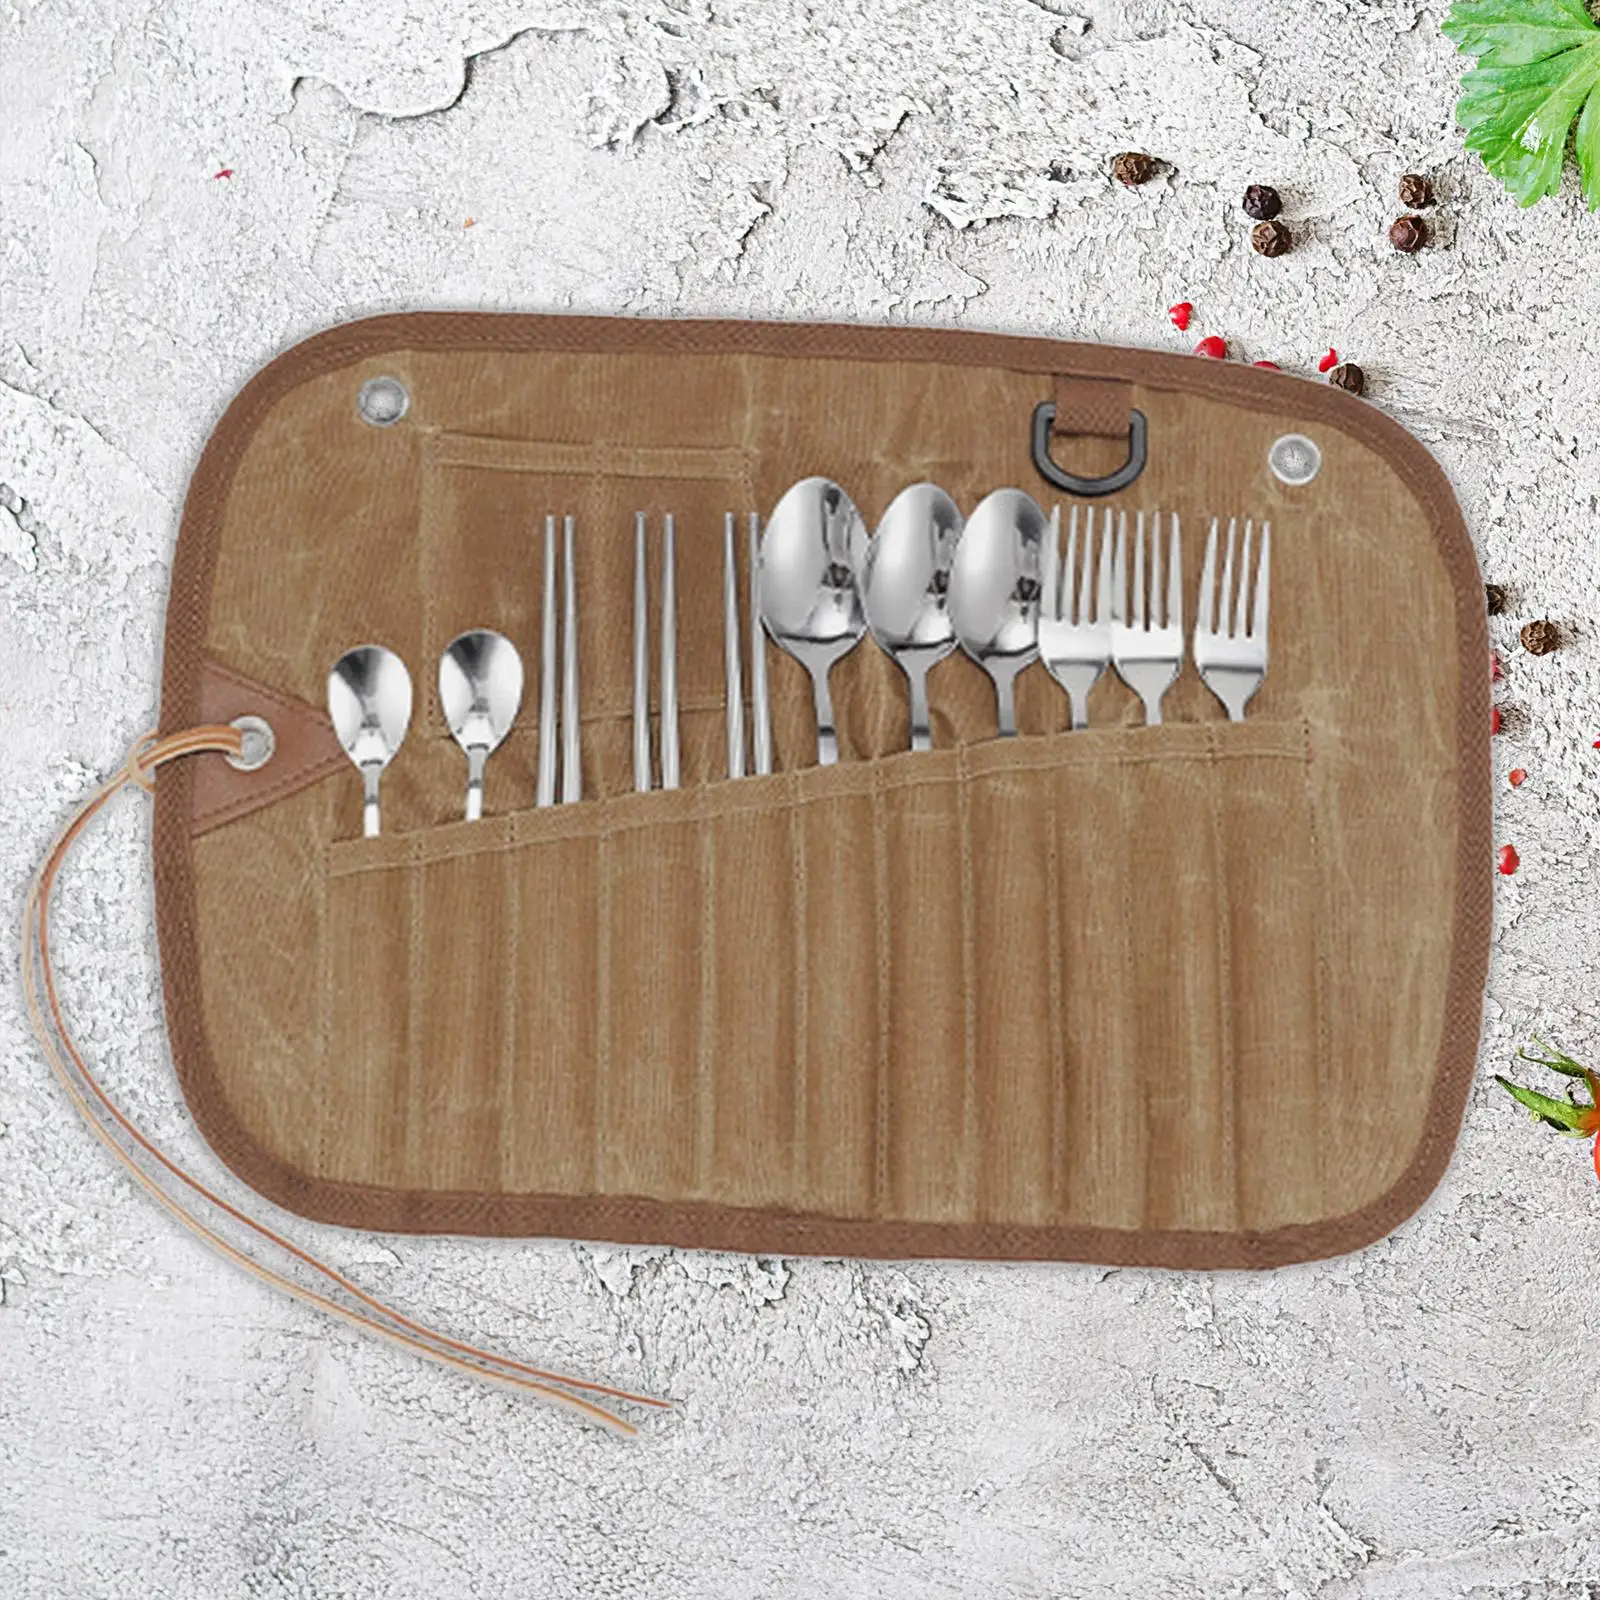 Outdoor Tableware Storage Bag Cutlery Roll Lightweight Cookware Flatware Organizers, Camping Utensil Bag for Travel Barbecue